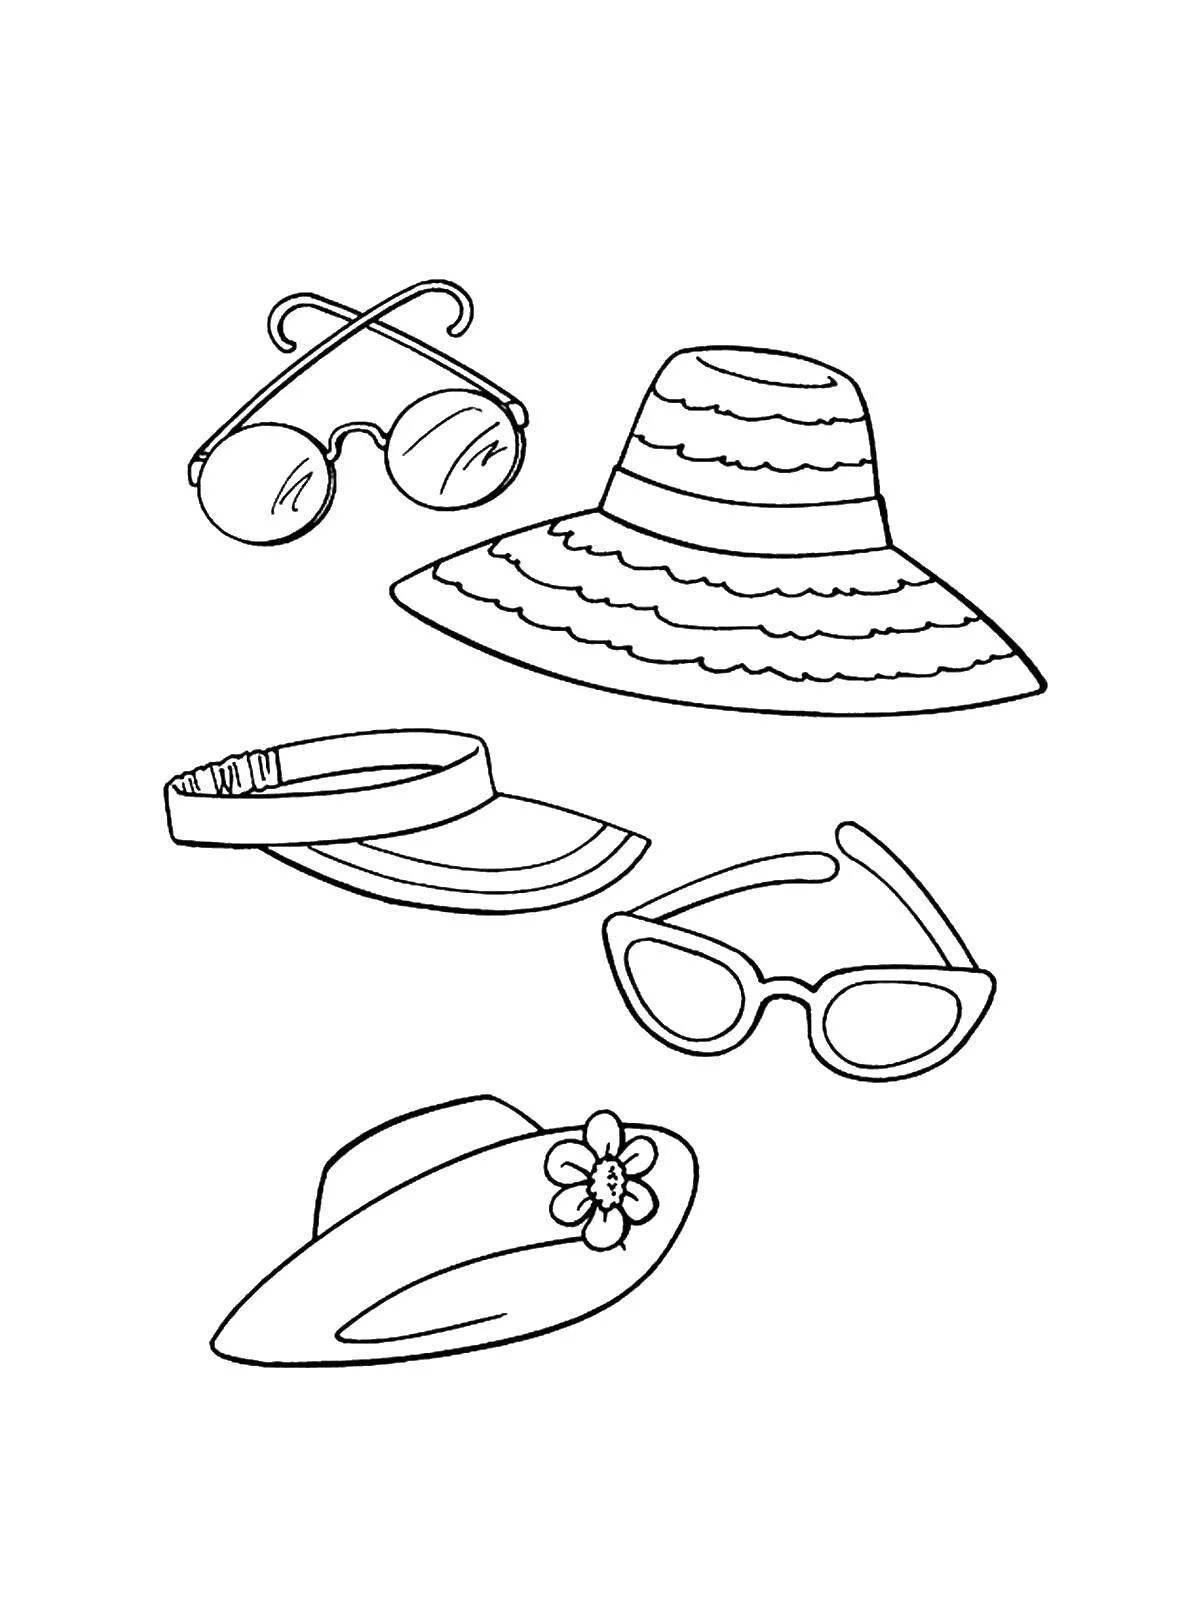 Coloring book funny baby hats